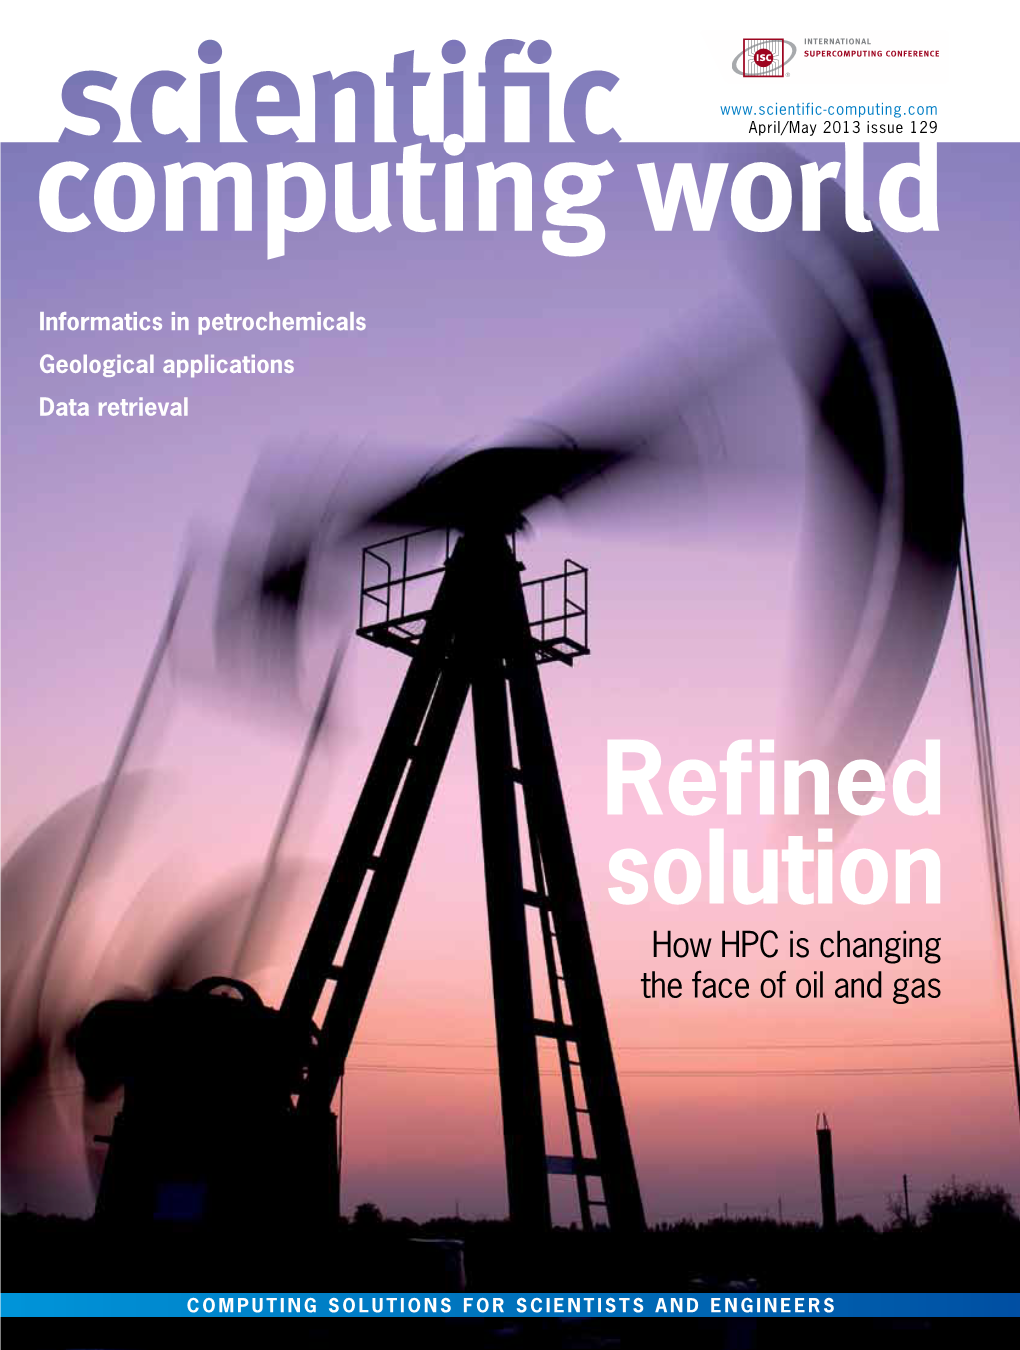 Refined Solution How HPC Is Changing the Face of Oil and Gas